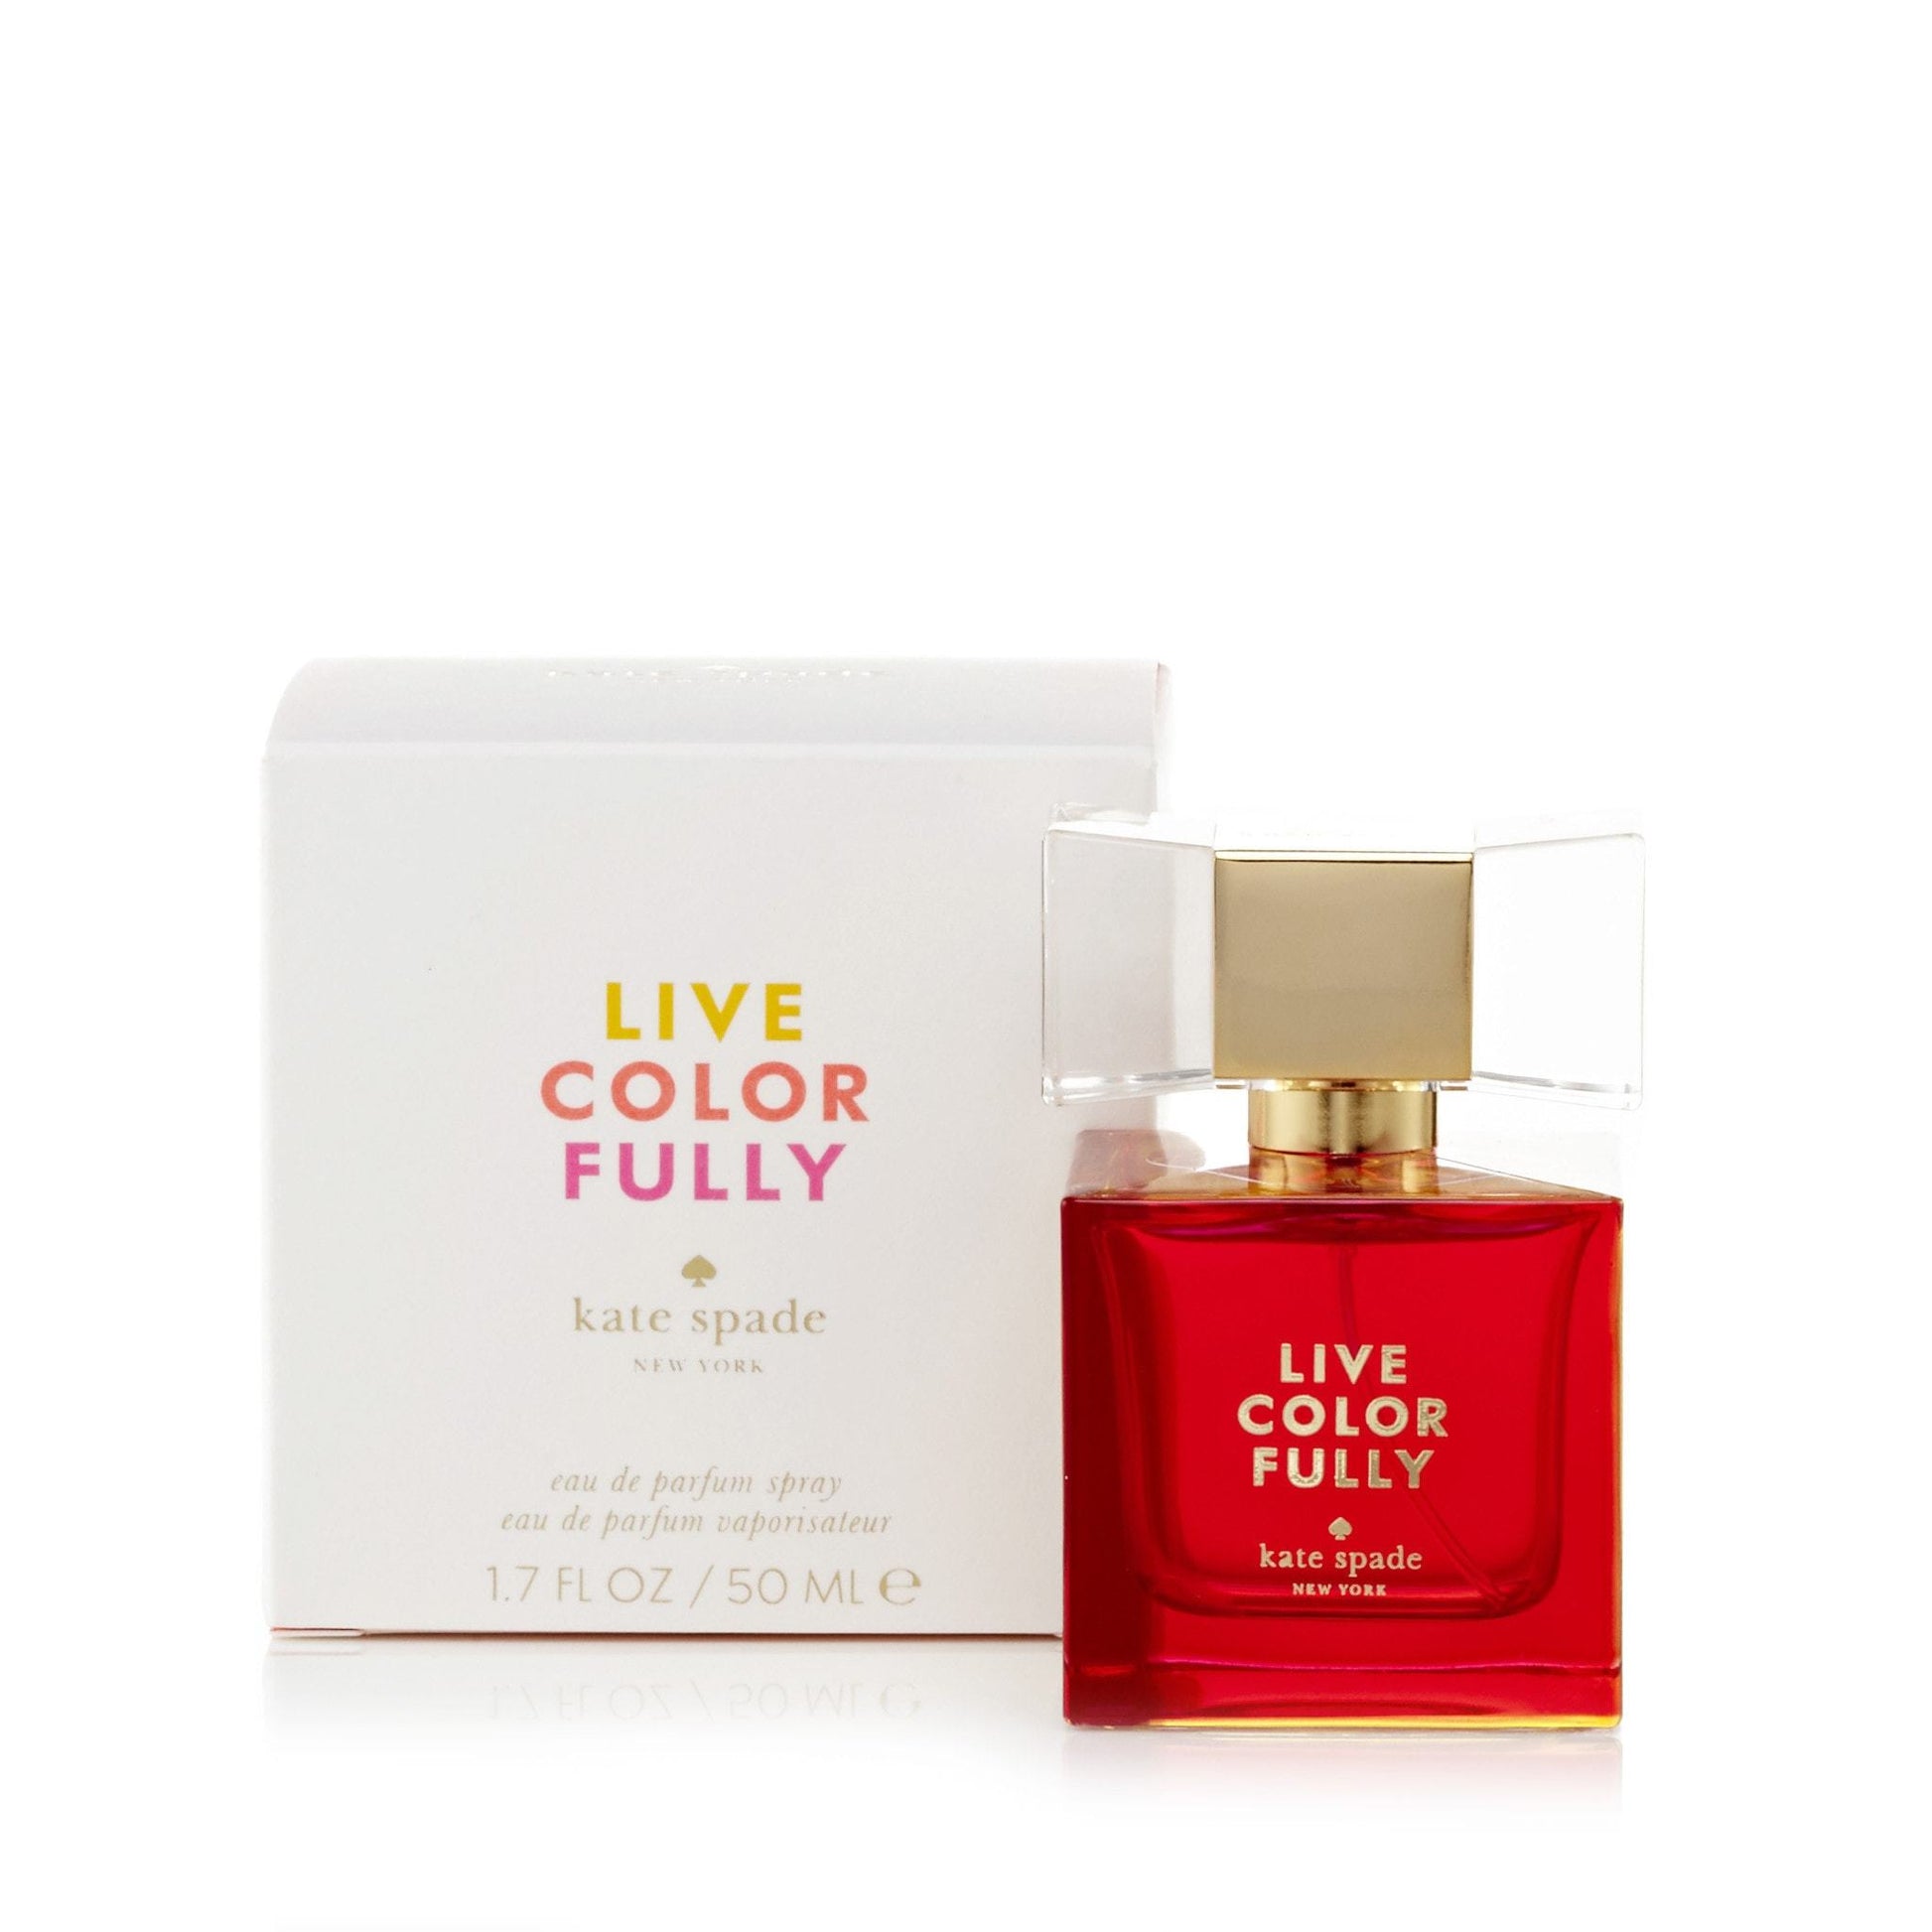 N.Y. Live Colorfully Eau de Parfum Spray for Women by Kate Spade, Product image 4